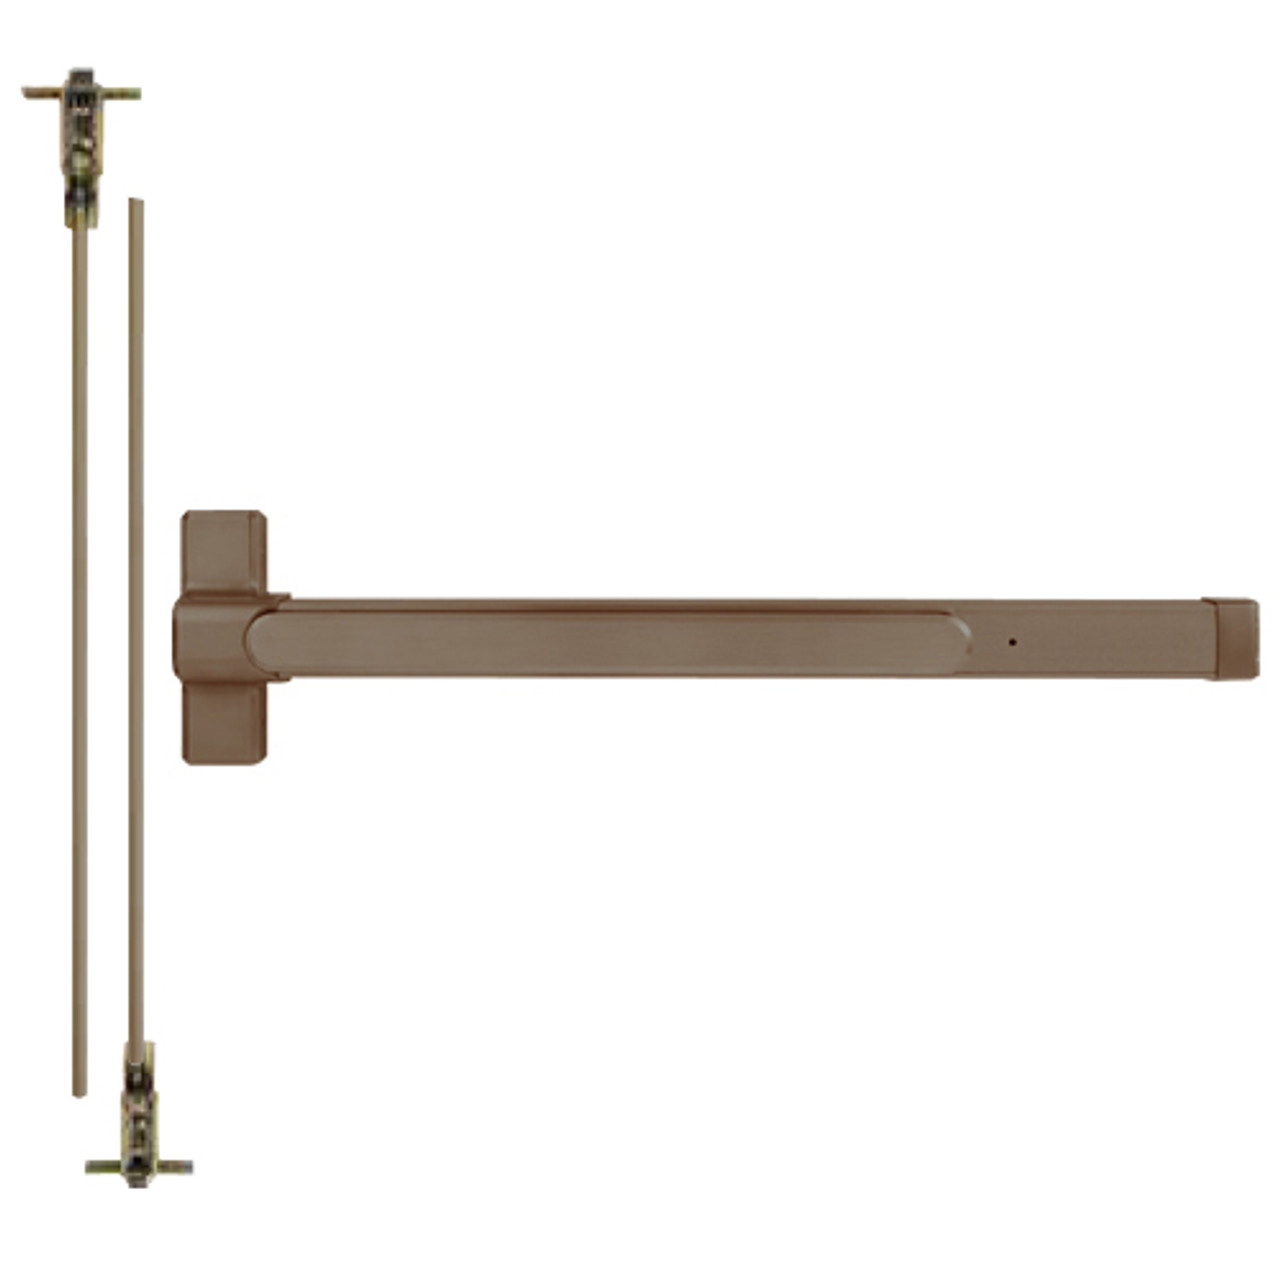 QED124LRX-36-8-313AN Stanley QED100 Series Heavy Duty Concealed Vertical Rod Hex Dog Exit Device in Anodized Duranodic Bronze Finish